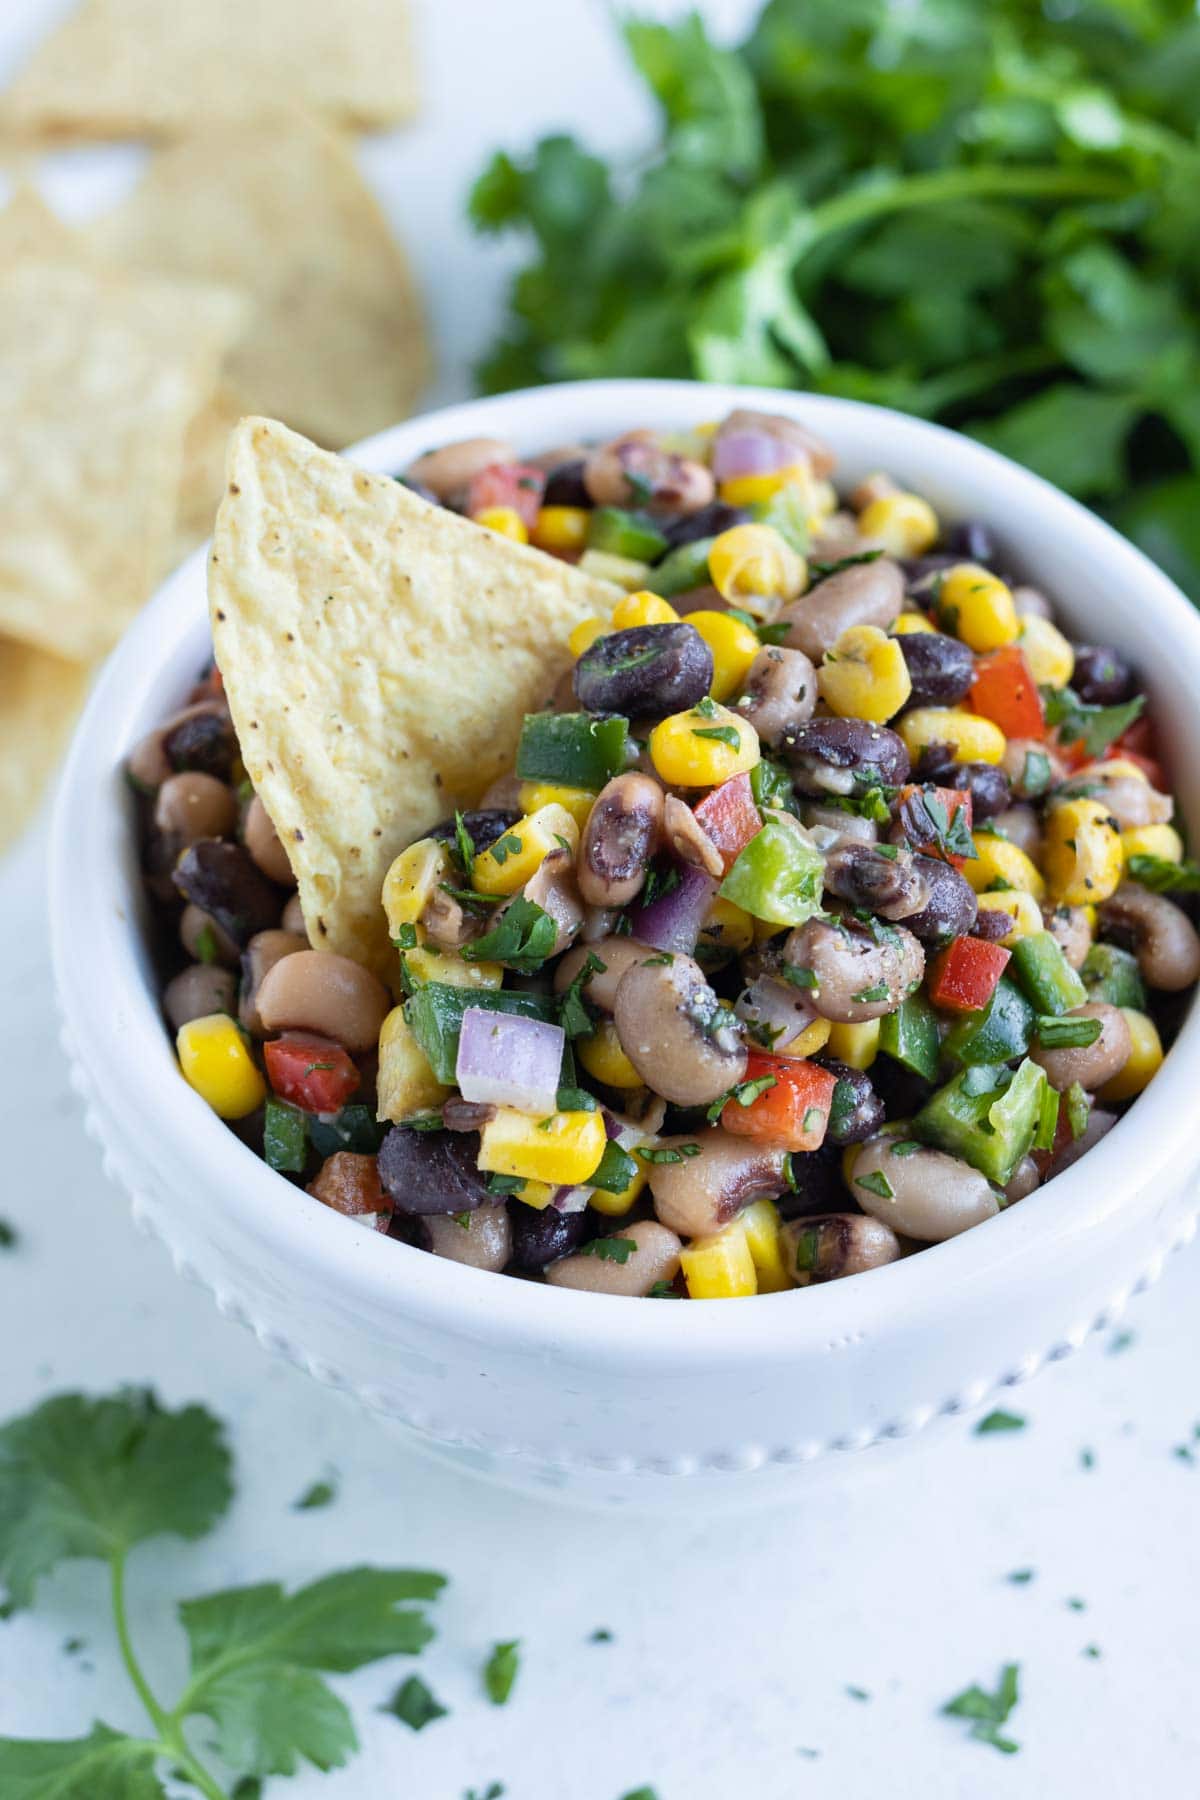 A bowl of Texas caviar is served for a healthy side dish.